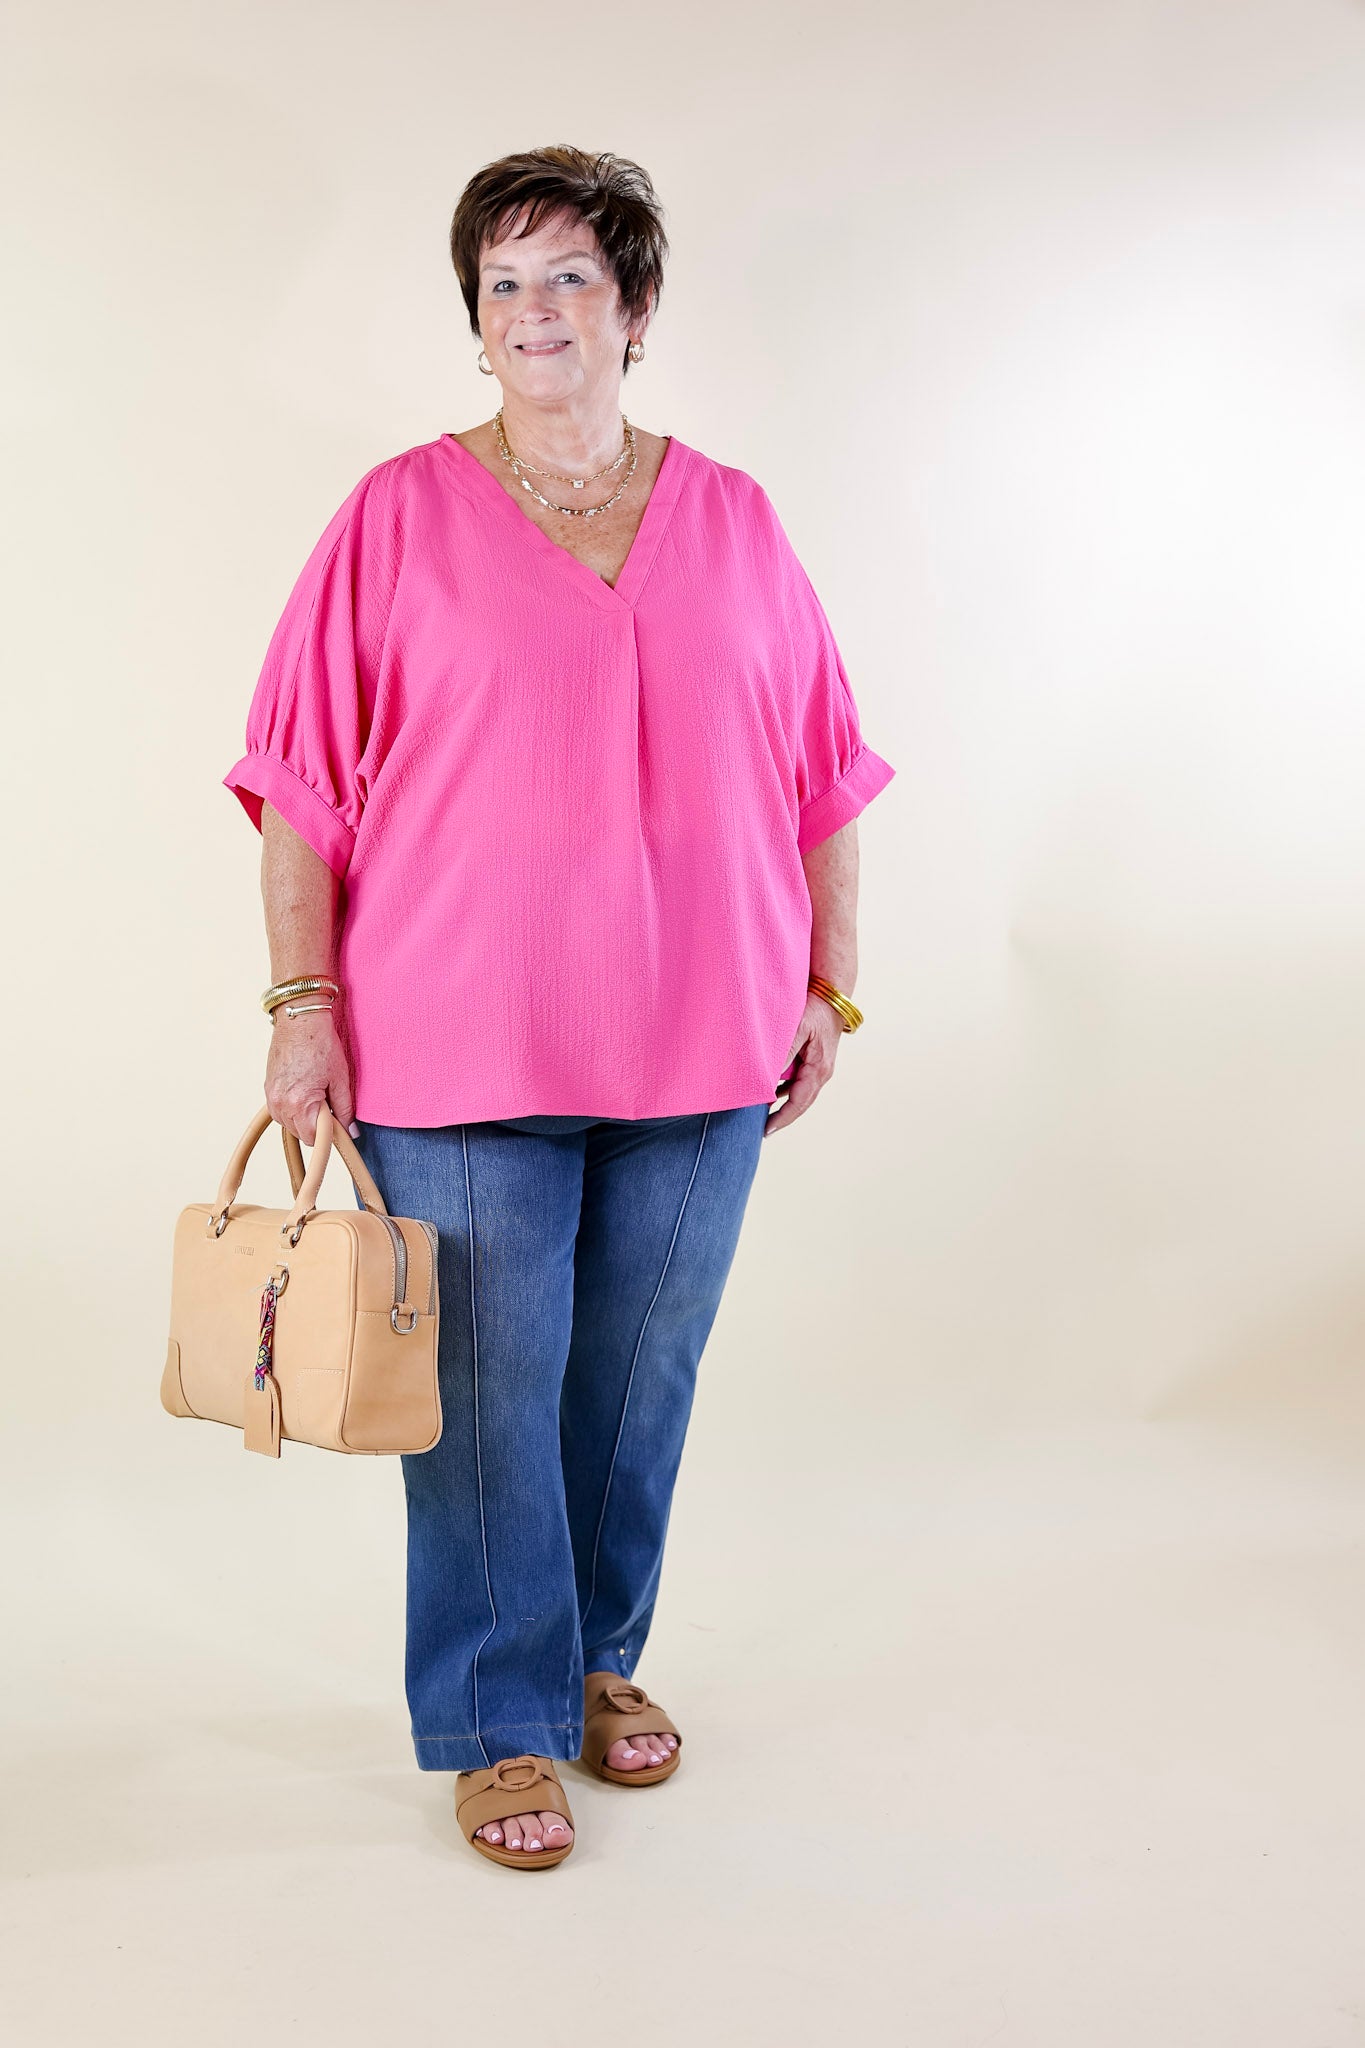 Chic and Charming V Neck Top with 3/4 Sleeves in Hot Pink - Giddy Up Glamour Boutique